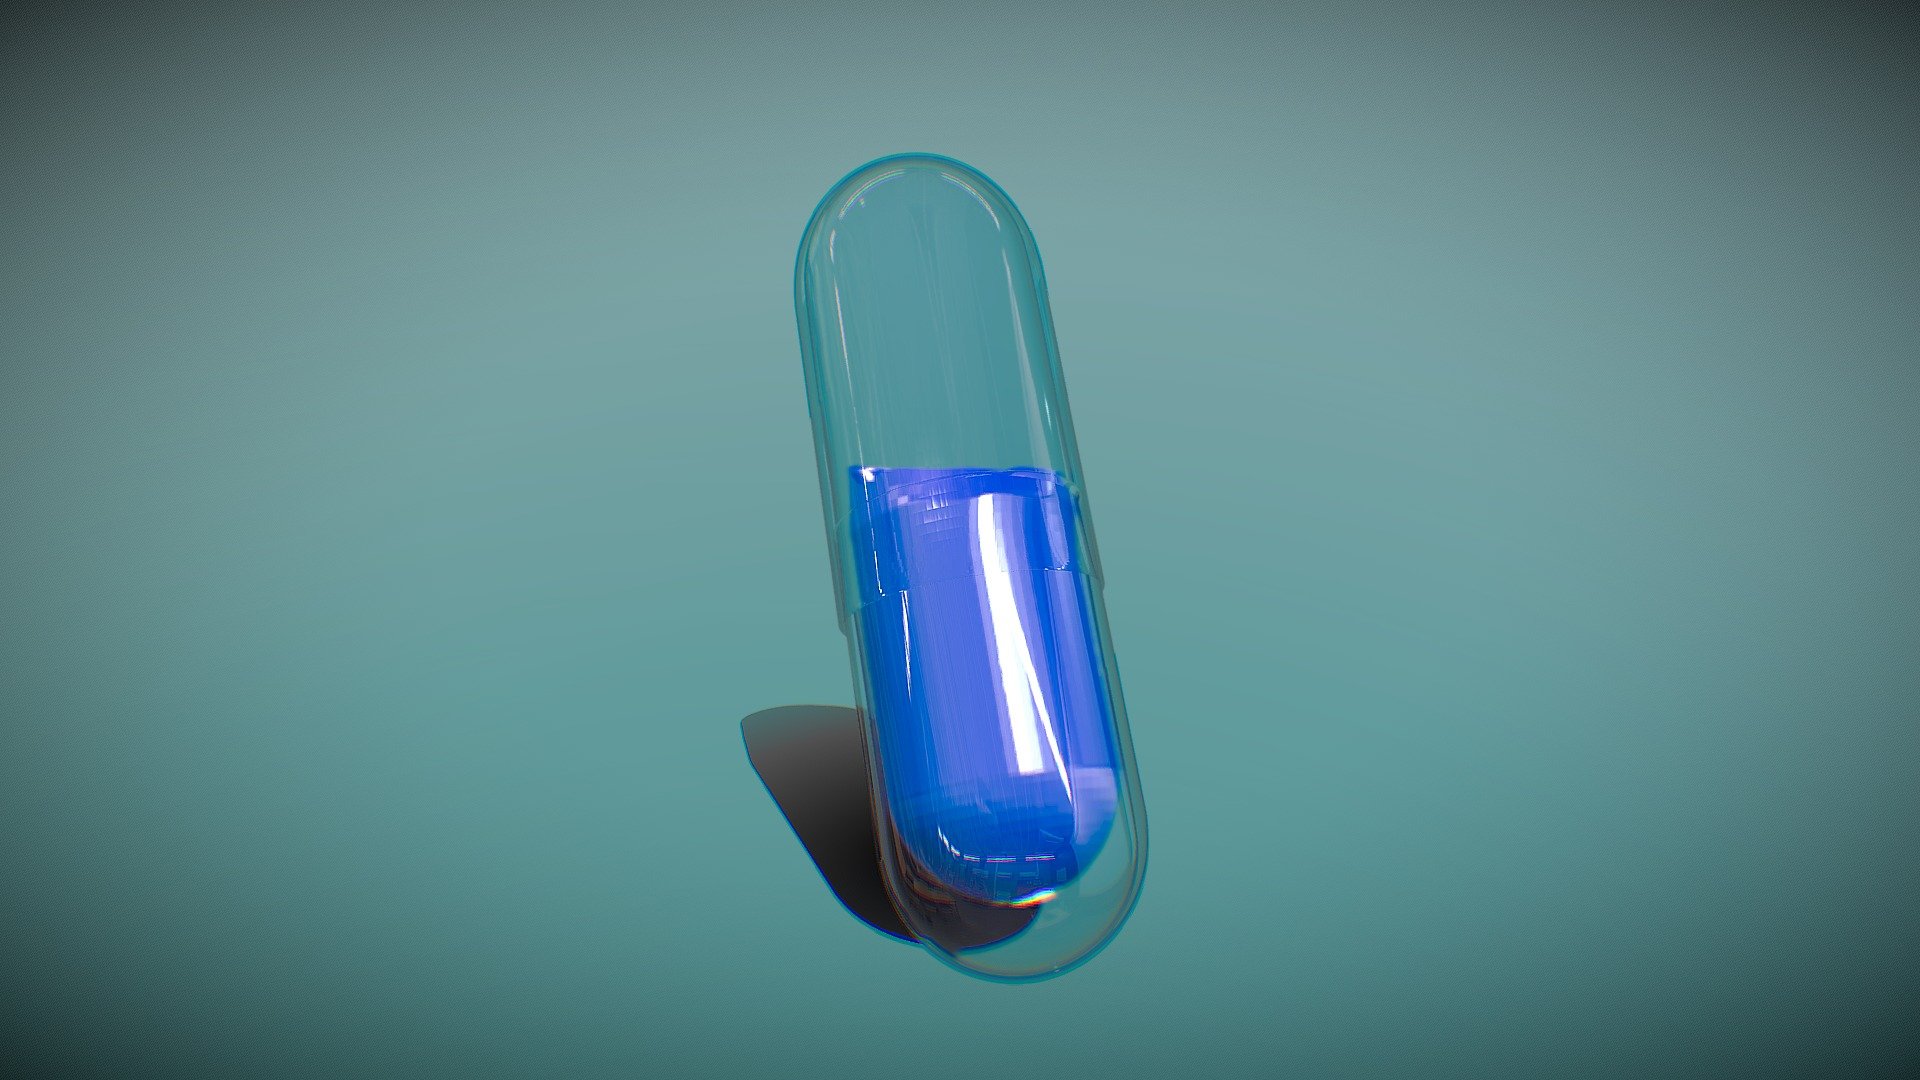 A pill discovered within the Blue Rose. Made of thin crystal on the outside. The substance is yet to be determinied 3d model